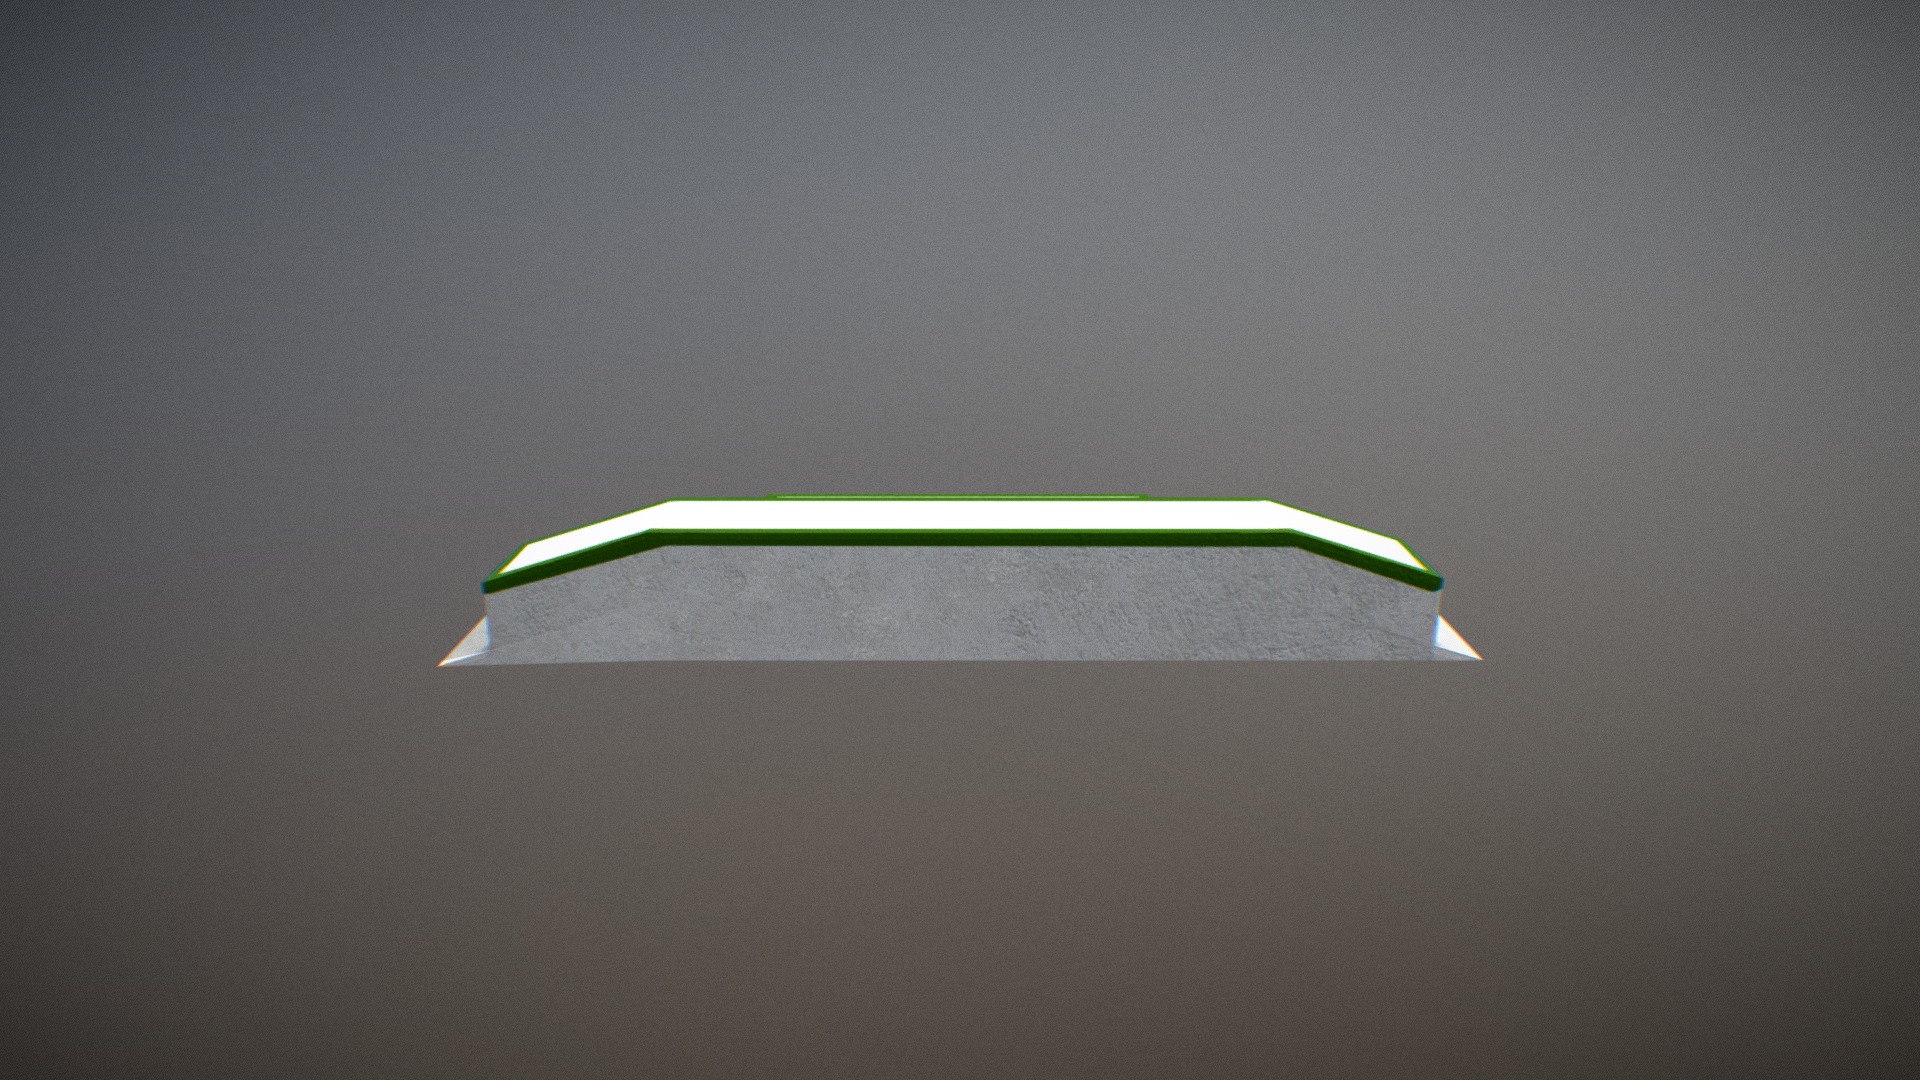 3D model Funbox - This is a 3D model of the Funbox. The 3D model is about a close-up of a green pen.